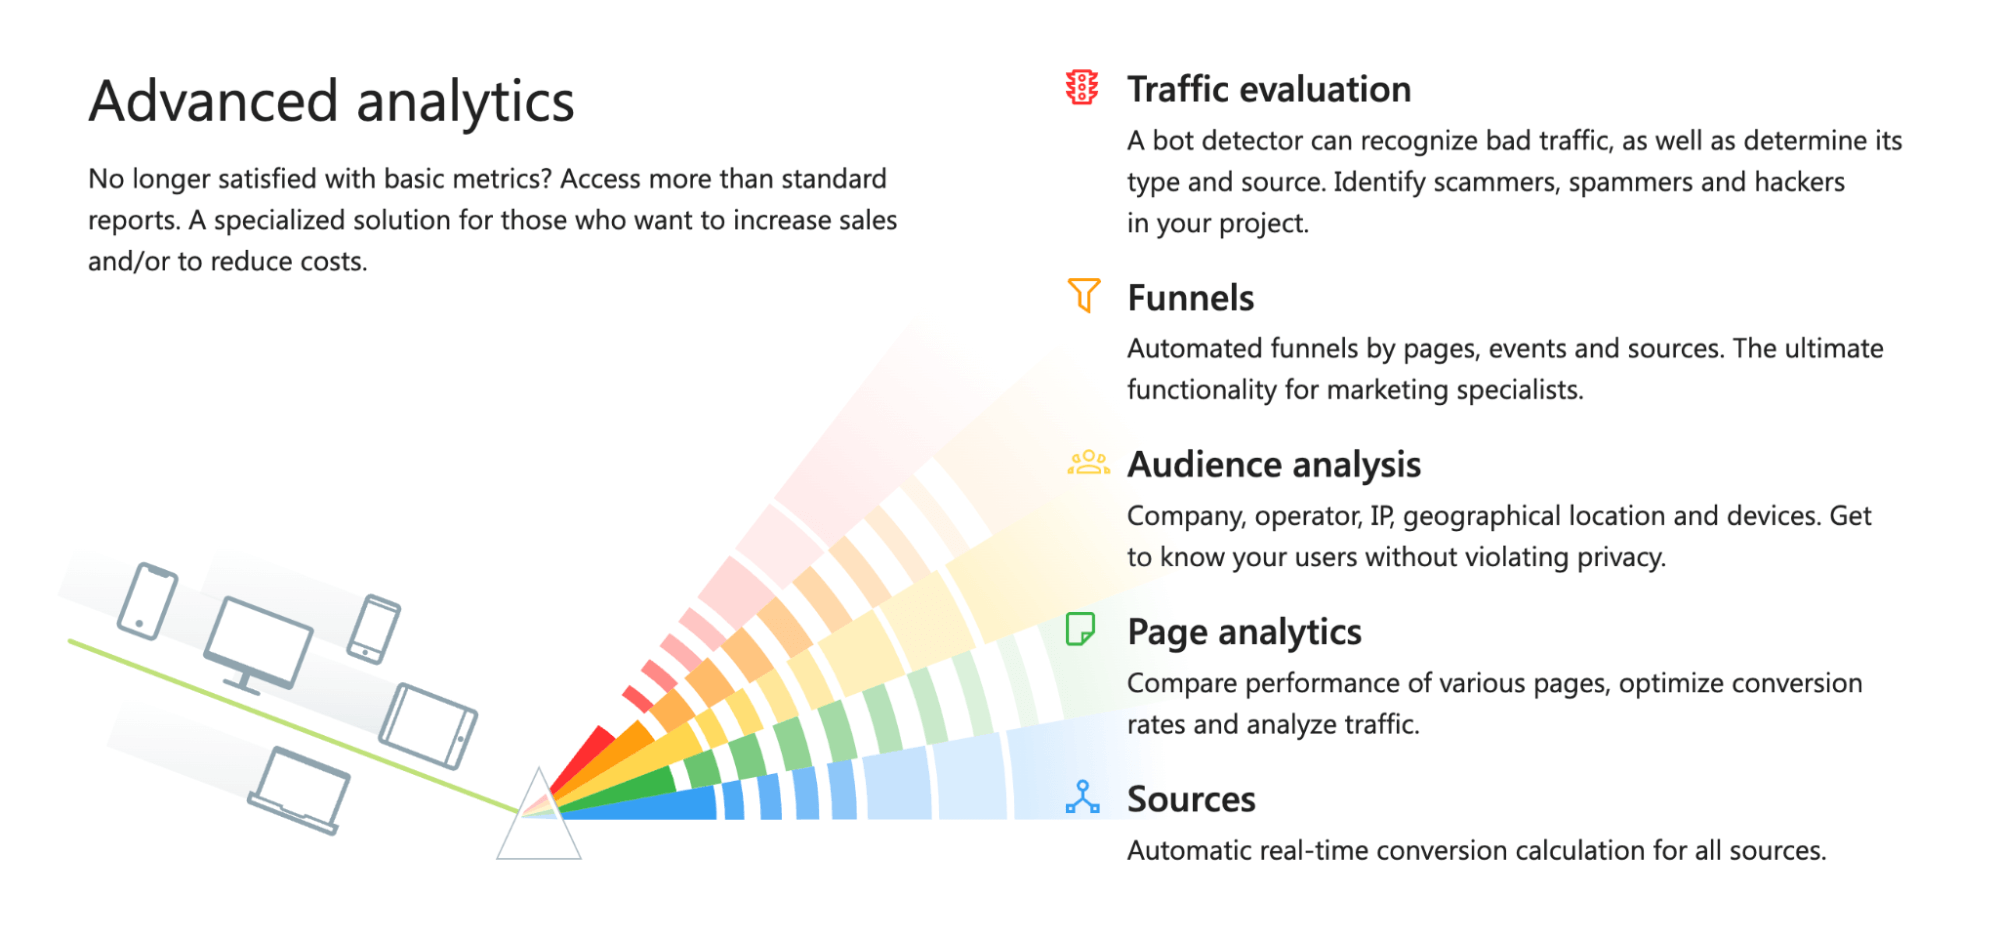 The image displays a section of Finteza’s homepage showcasing Advanced analytics like traffic evaluation, funnels, audience analysis, page analytics, and sources.